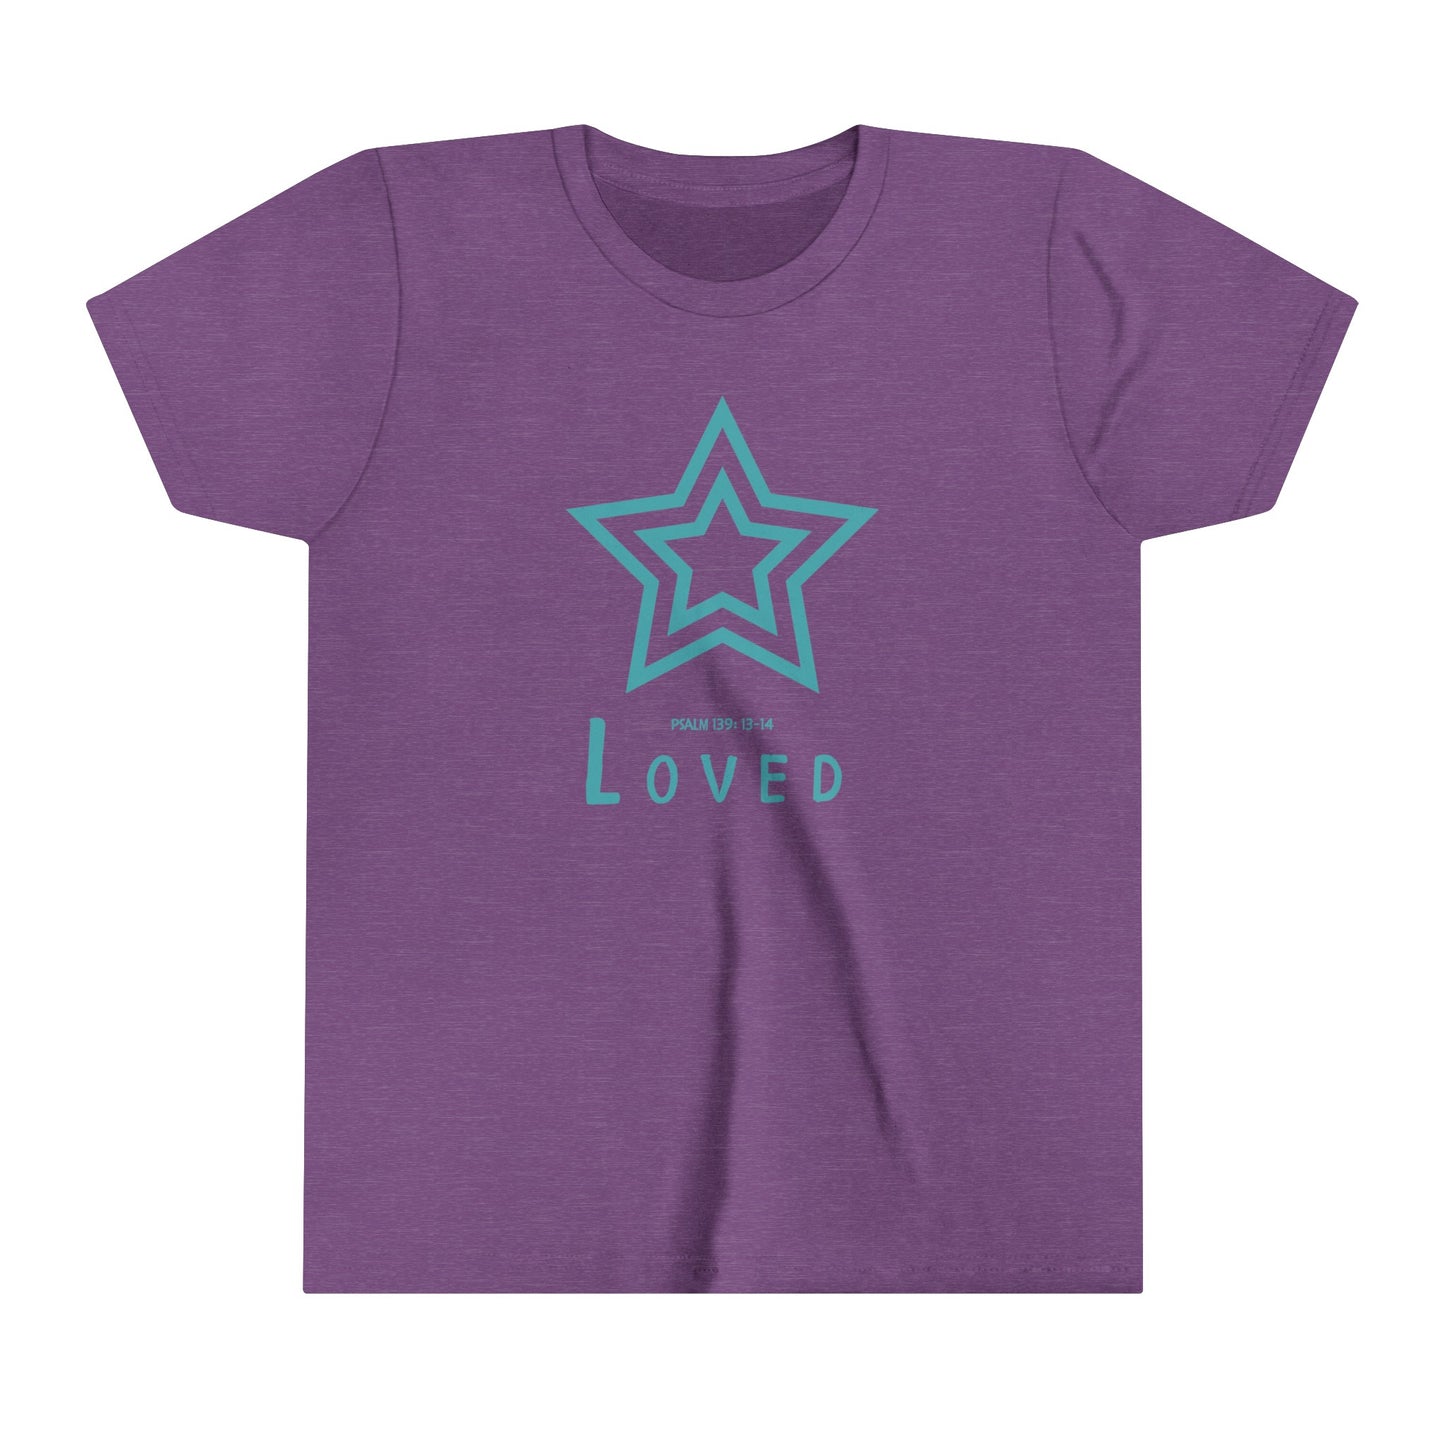 LOVED Youth Short Sleeve Tee